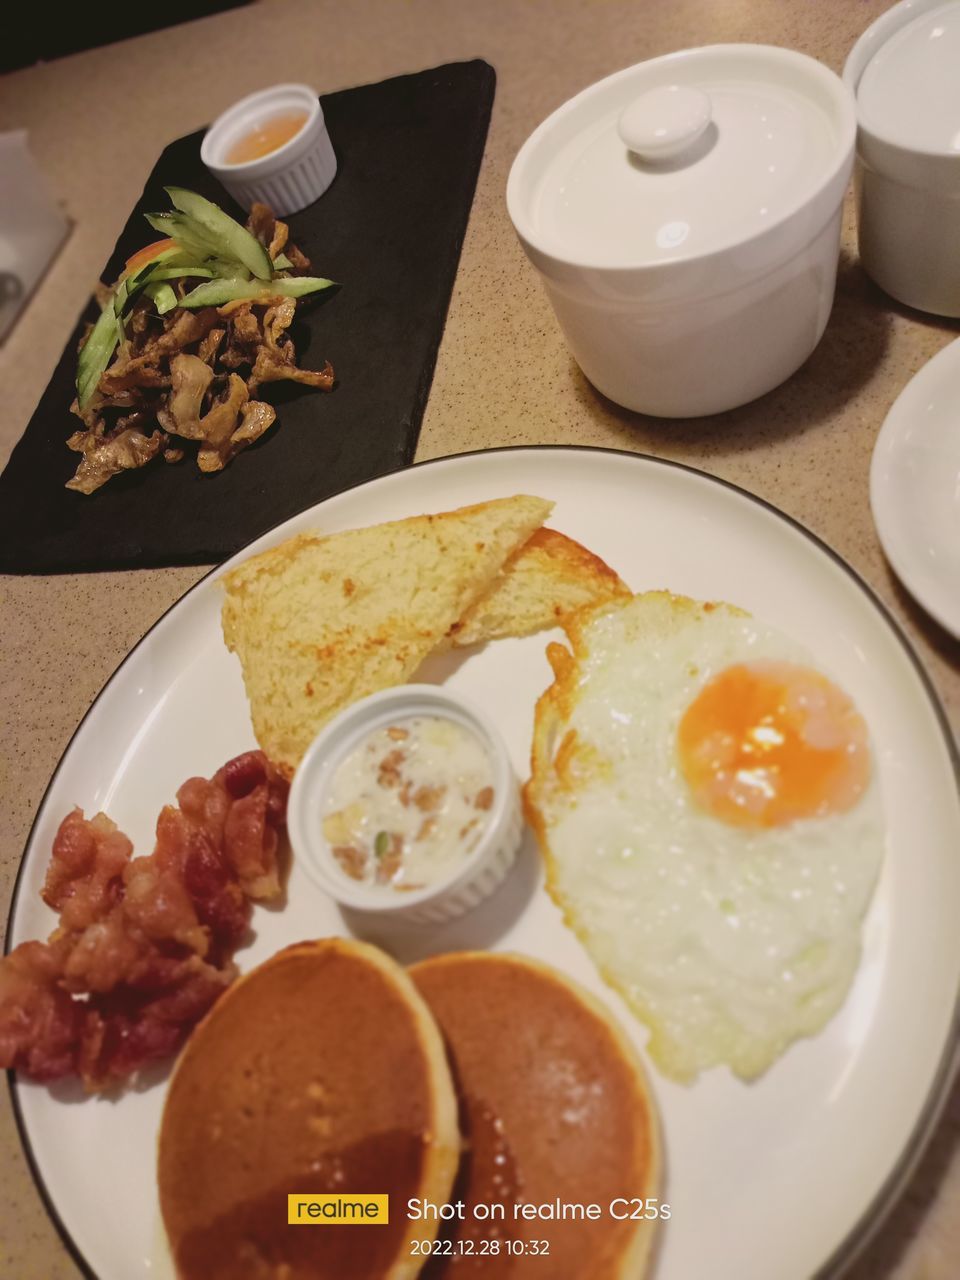 food and drink, food, healthy eating, meal, breakfast, plate, table, dish, egg, indoors, meat, wellbeing, no people, freshness, high angle view, cuisine, tableware, lunch, bowl, fast food, supper, fried, fried egg, brunch, still life, vegetable, drink